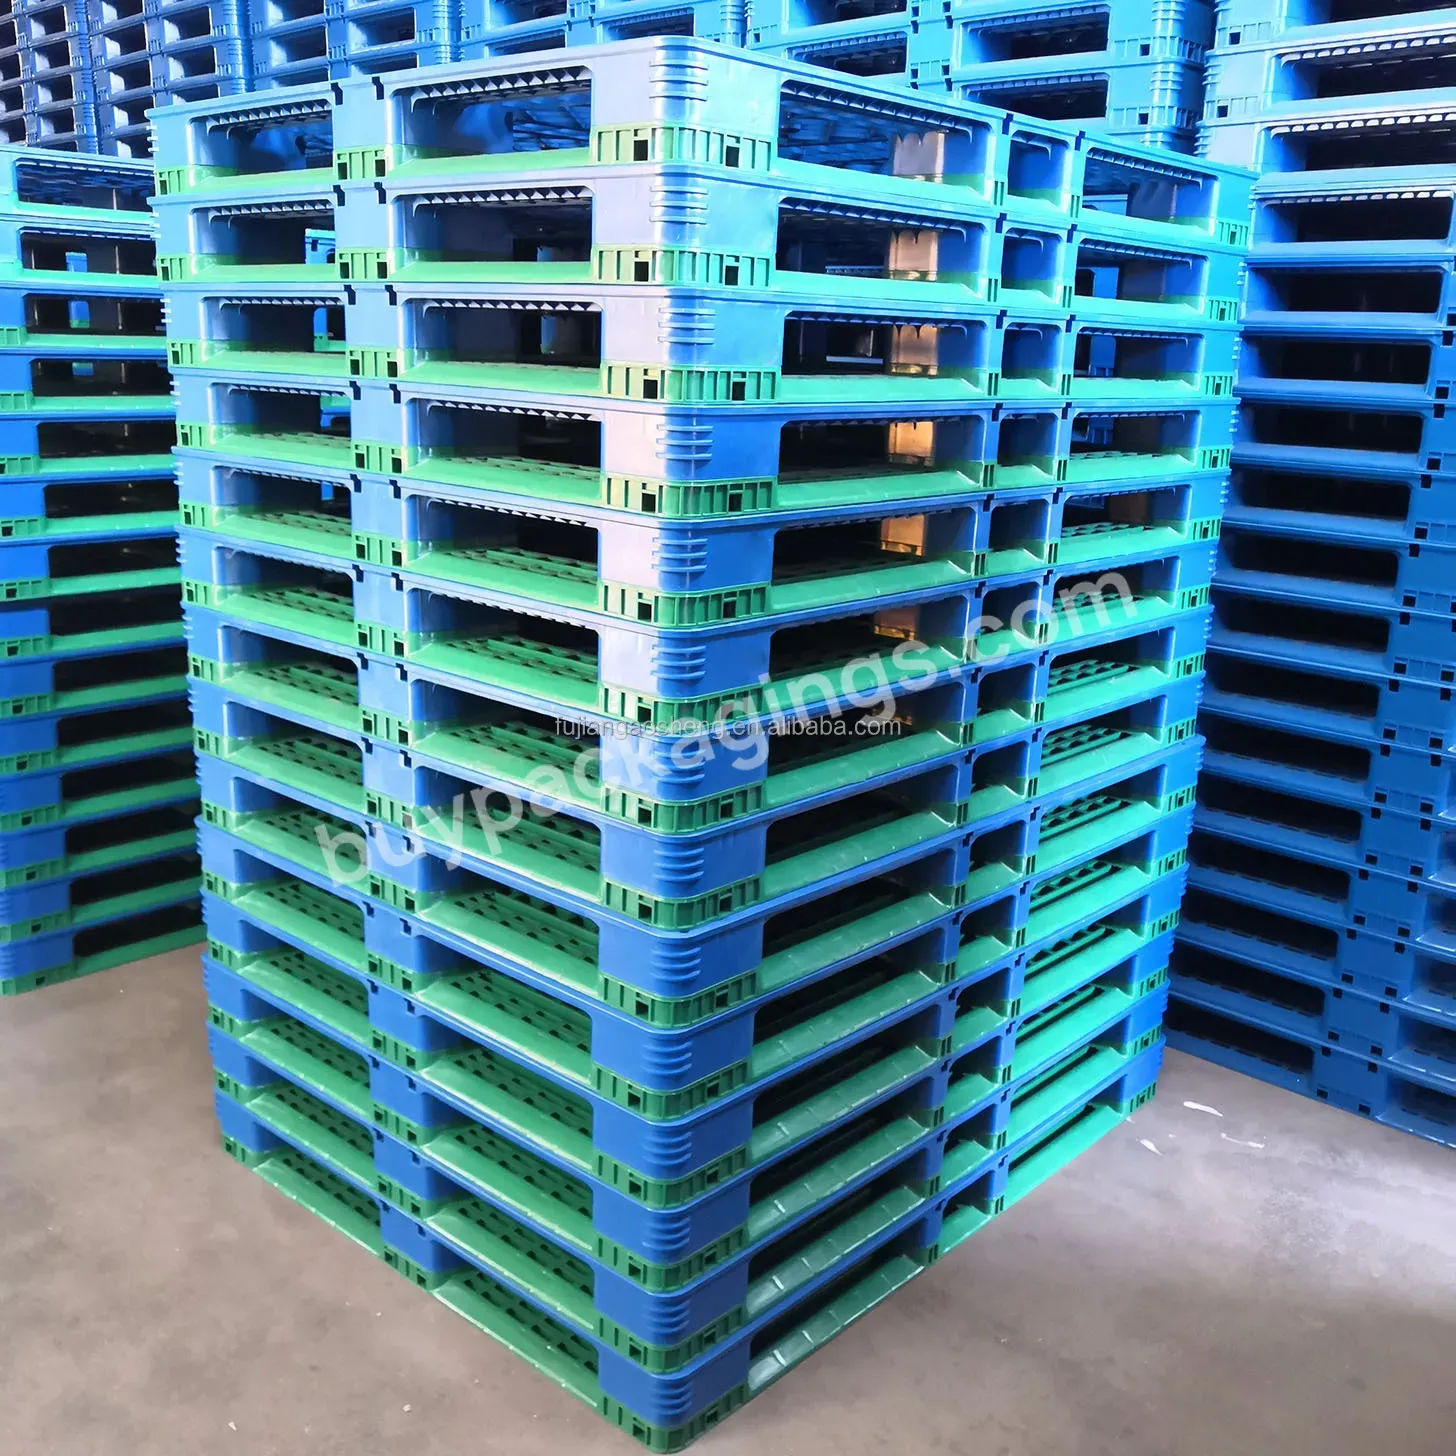 Euro Pallet 4way Beverage Cheap Price Shipping Storage Heavy Duty Hdpe Large Stackable Plastic 1210blue013 Gaosheng Single Faced - Buy Plastic Pallet,Small Size Plastic Pallet,Pallet For Sale.